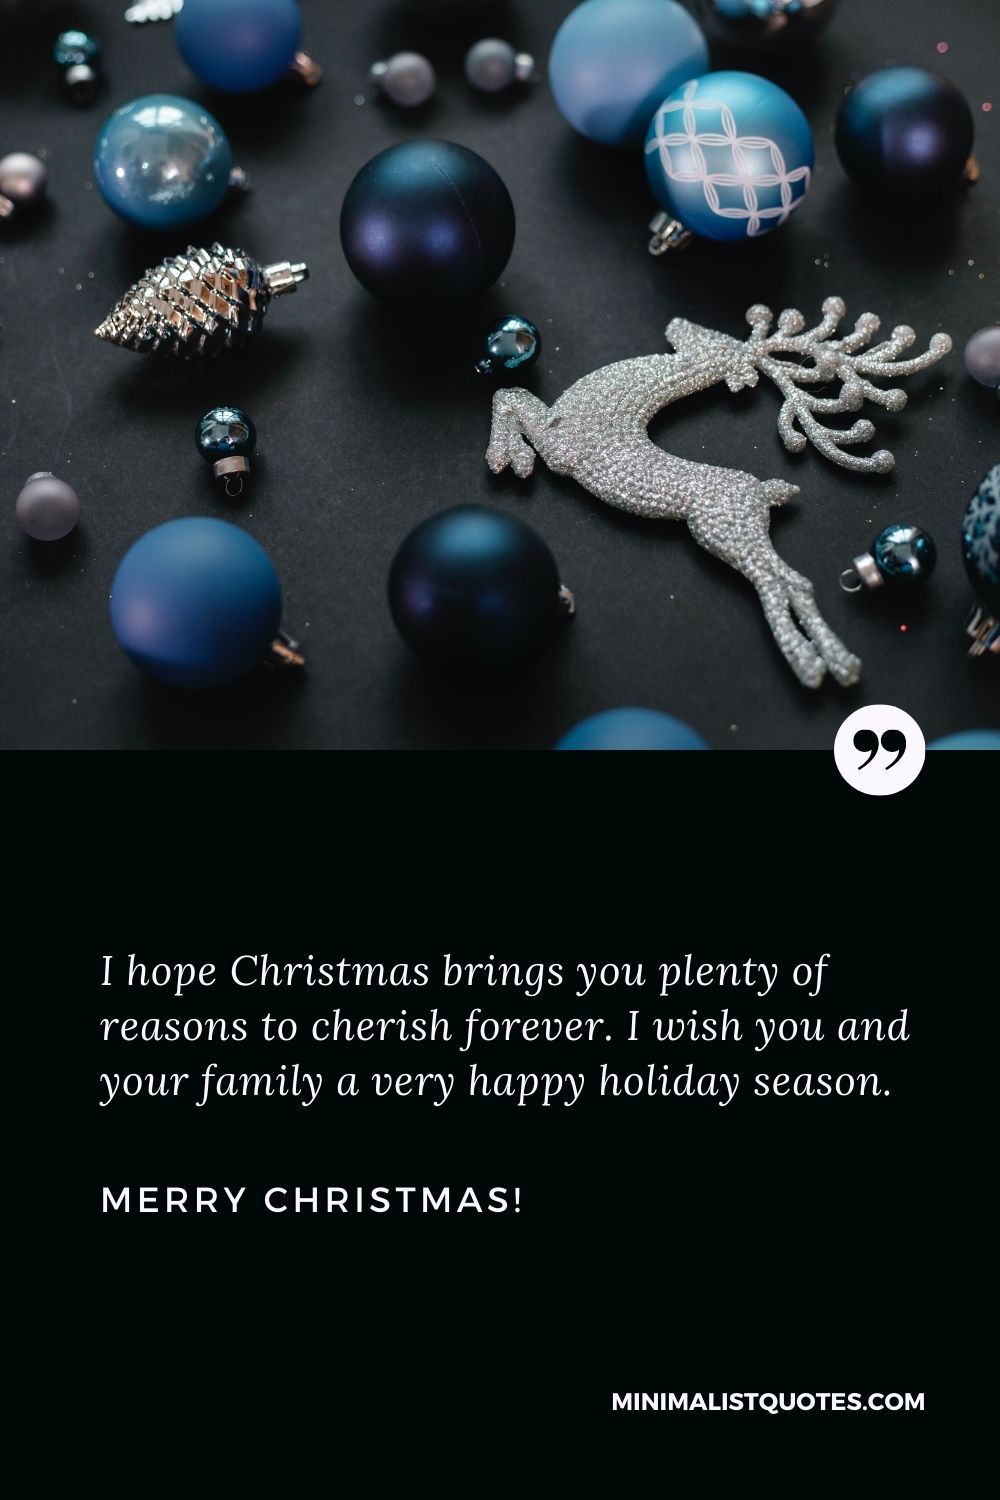 Christmas card sayings: I hope Christmas brings you plenty of reasons to cherish forever. I wish you and your family a very happy holiday season. Merry Christmas!